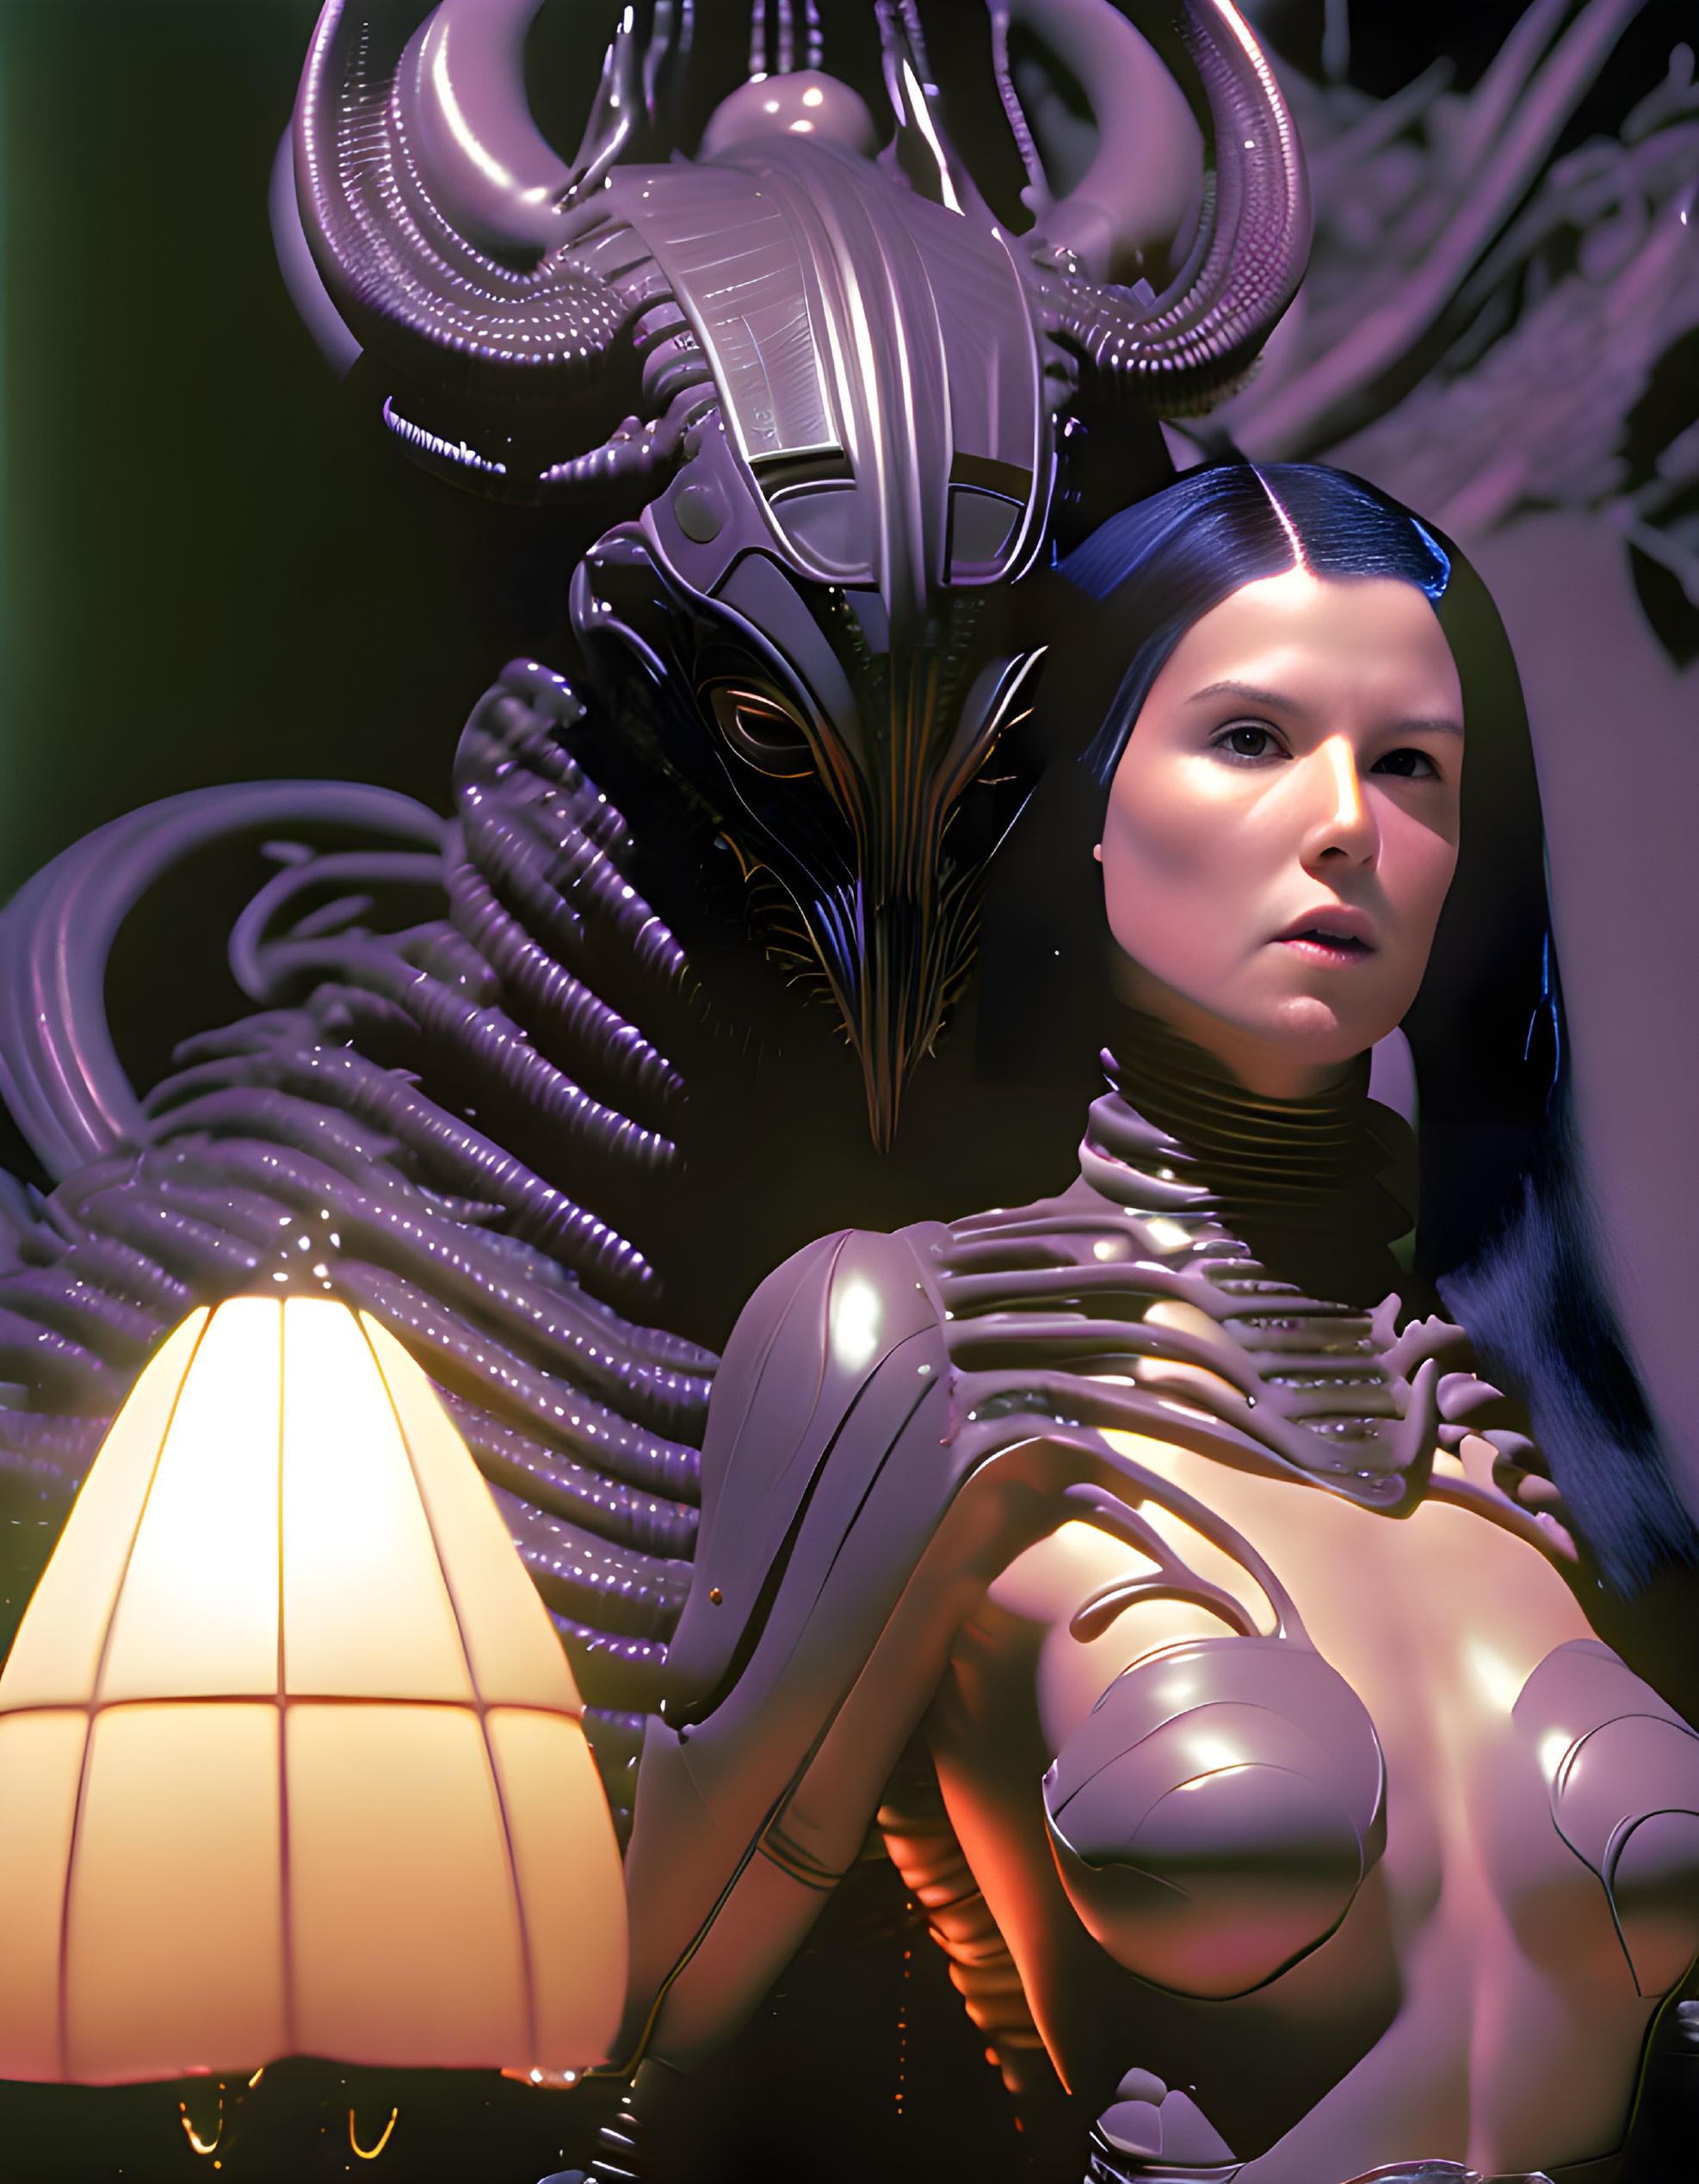 Futuristic female android with biomechanical design beside classic lamp